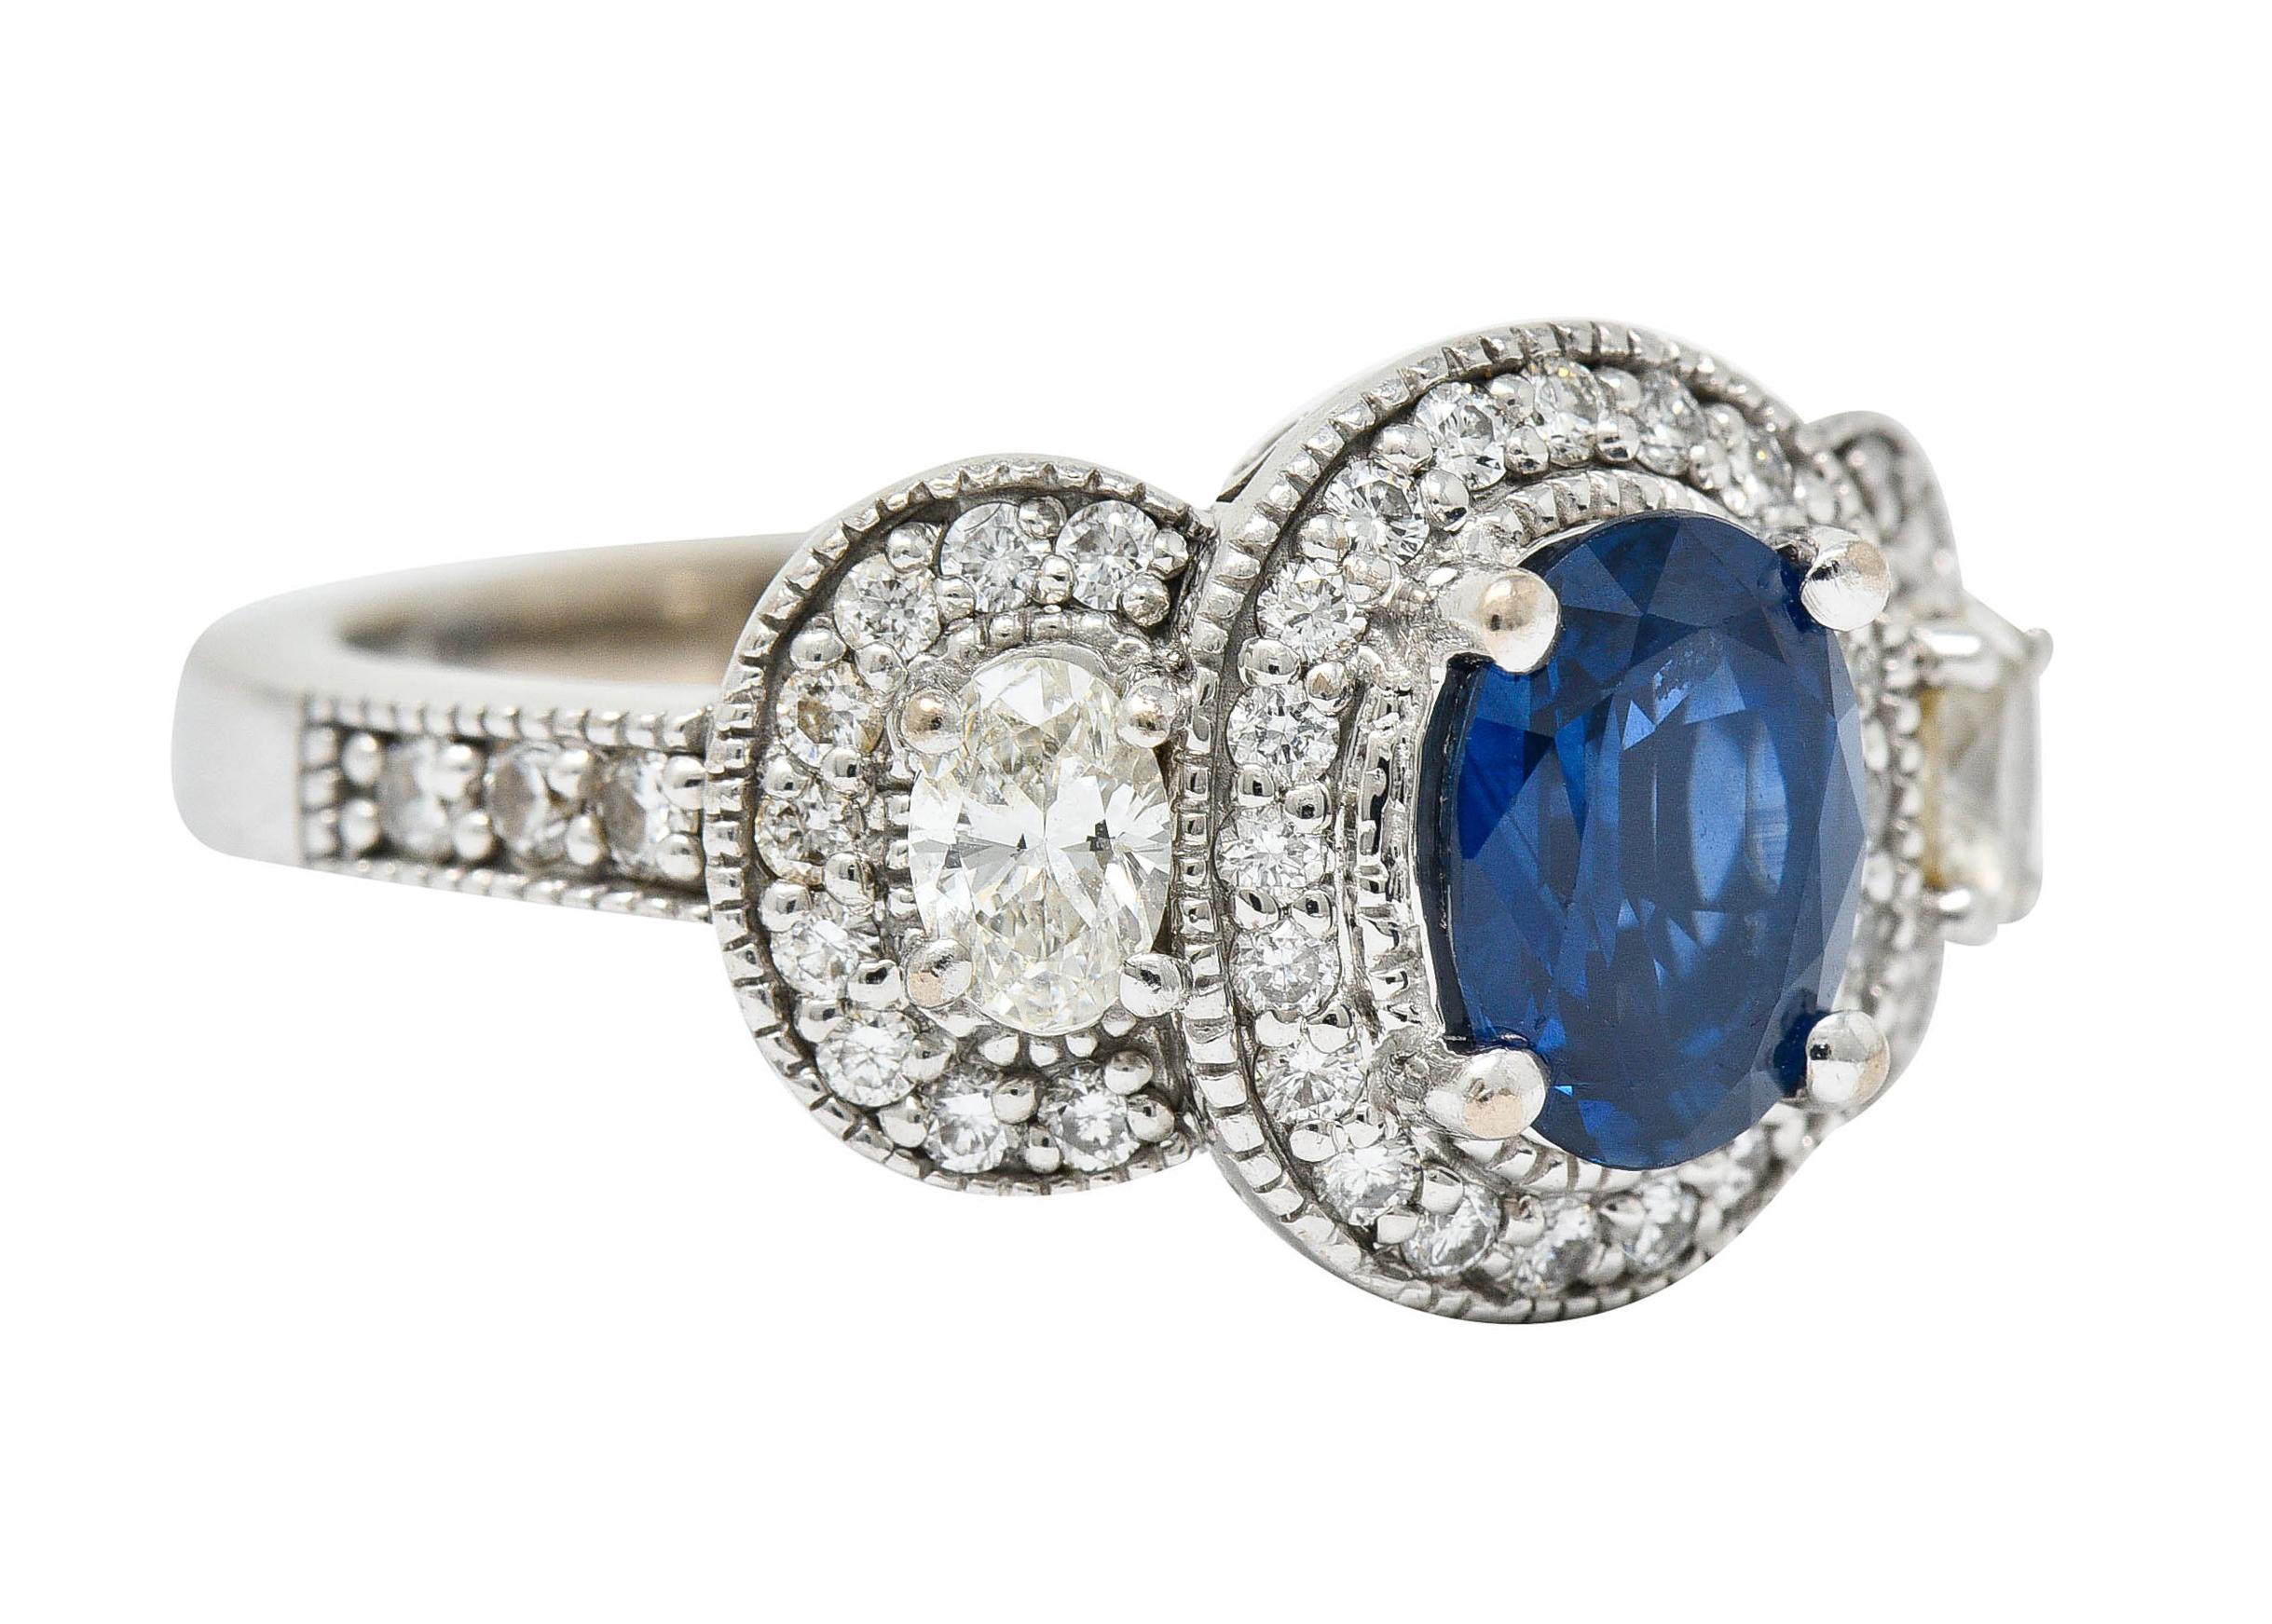 Ring is designed as three clusters comprised of diamond and milgrain surrounds

Centering an oval cut sapphire weighing approximately 1.50 carats - medium dark blue in color

Flanked by two oval cut diamonds weighing in total approximately 0.45